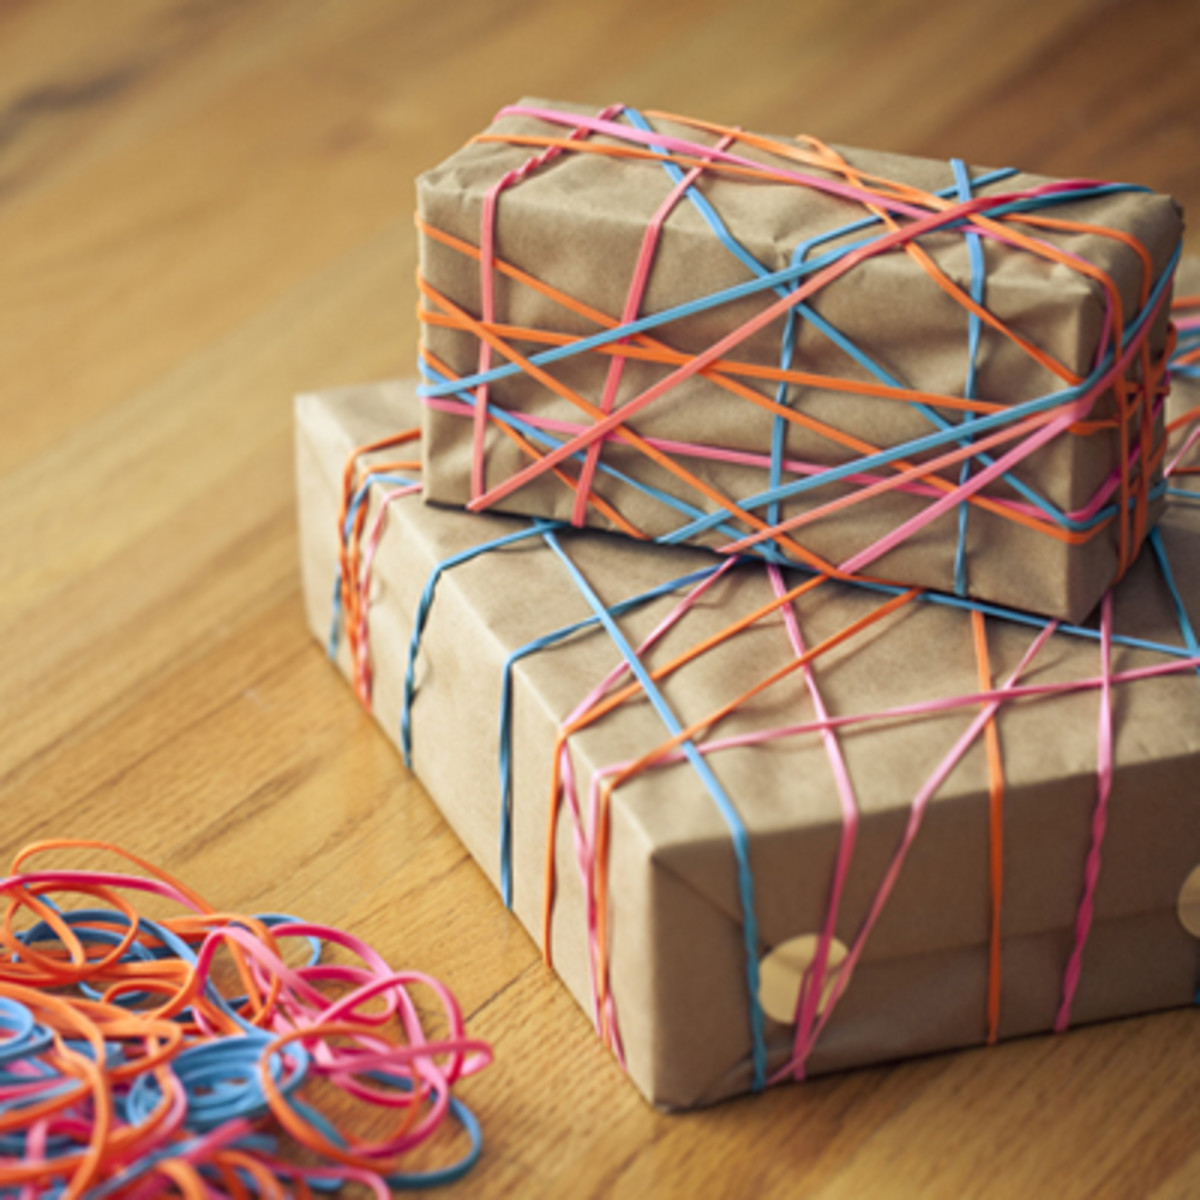 A rubber band tied gift is very creative wrapping prank. Wrapping your presents like this is sure to give a few giggles!